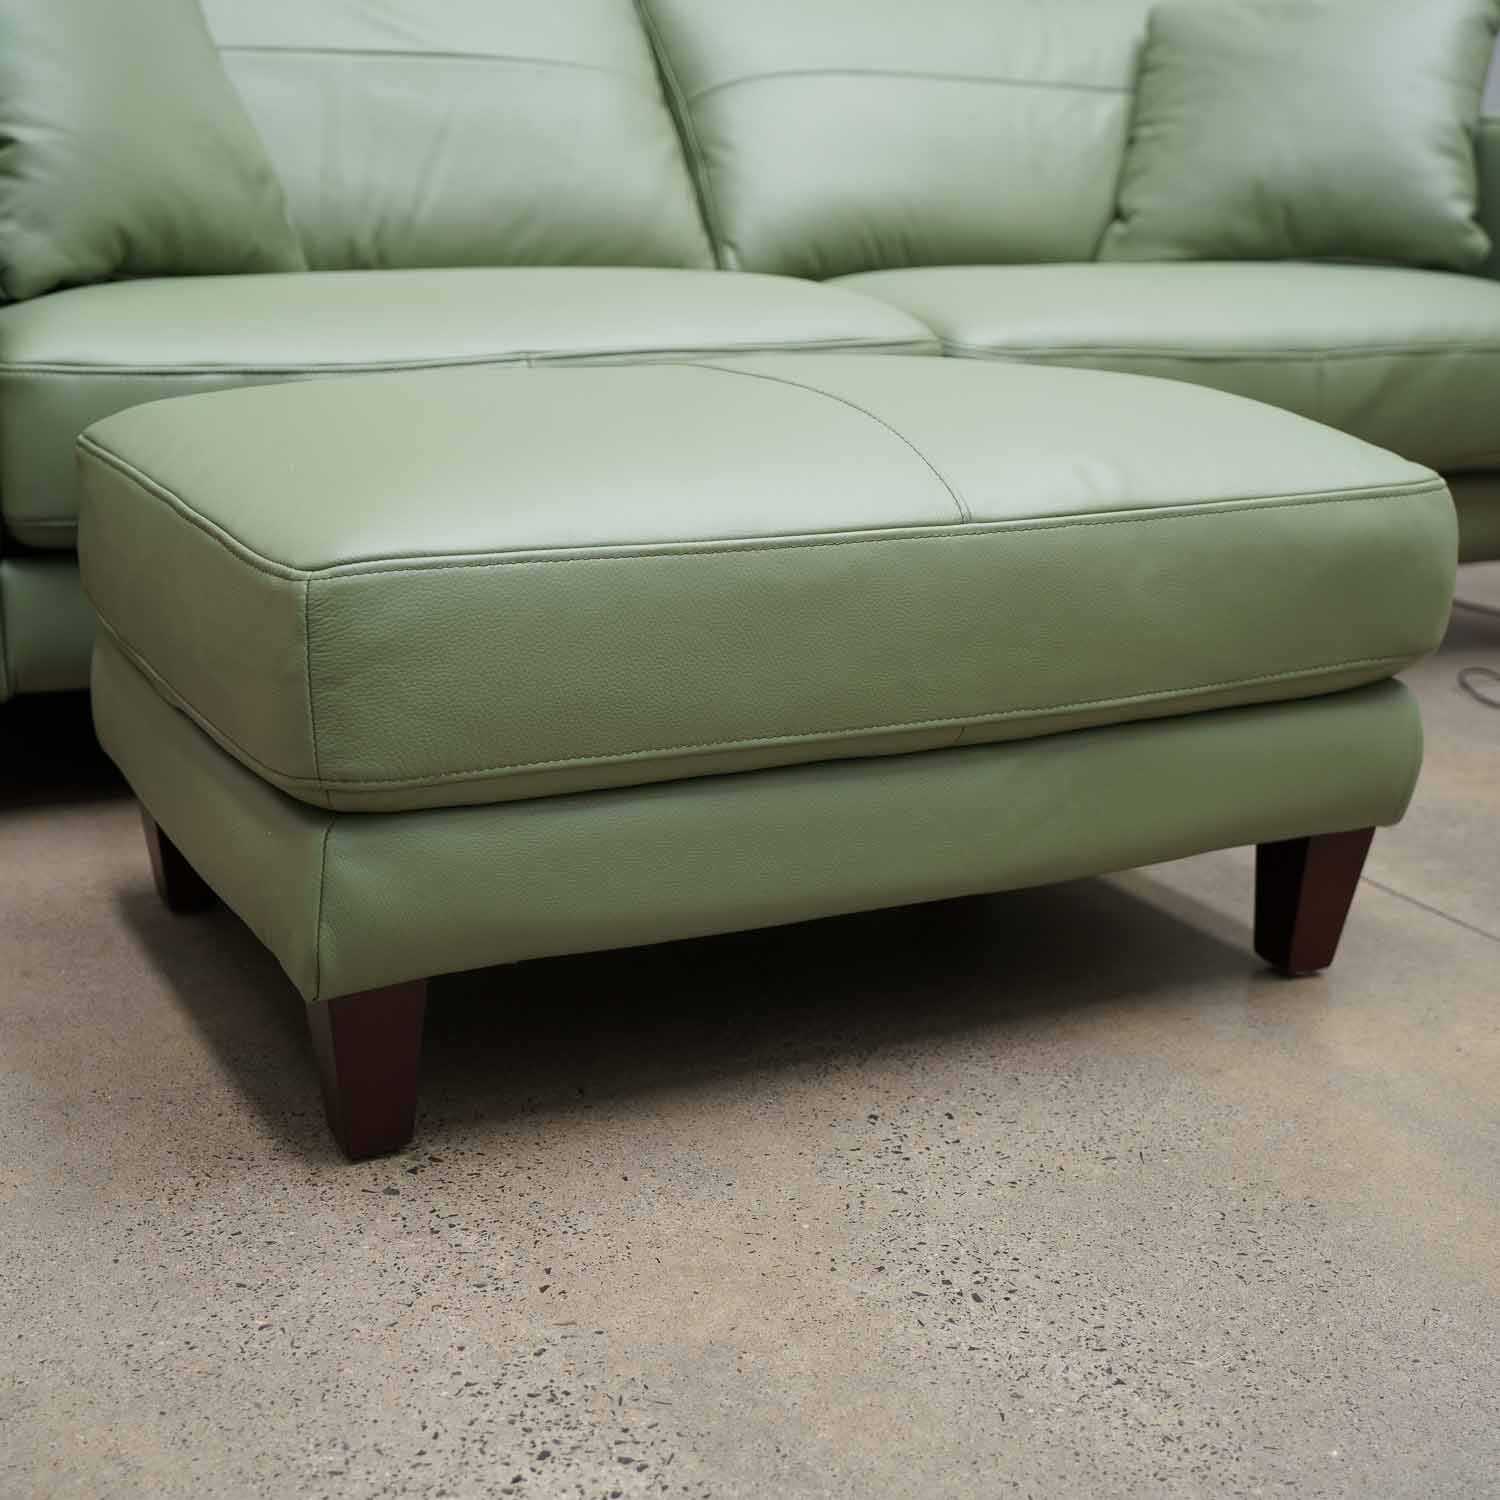 Imperfect Chelsea Petite Ottoman in Myrtle Green